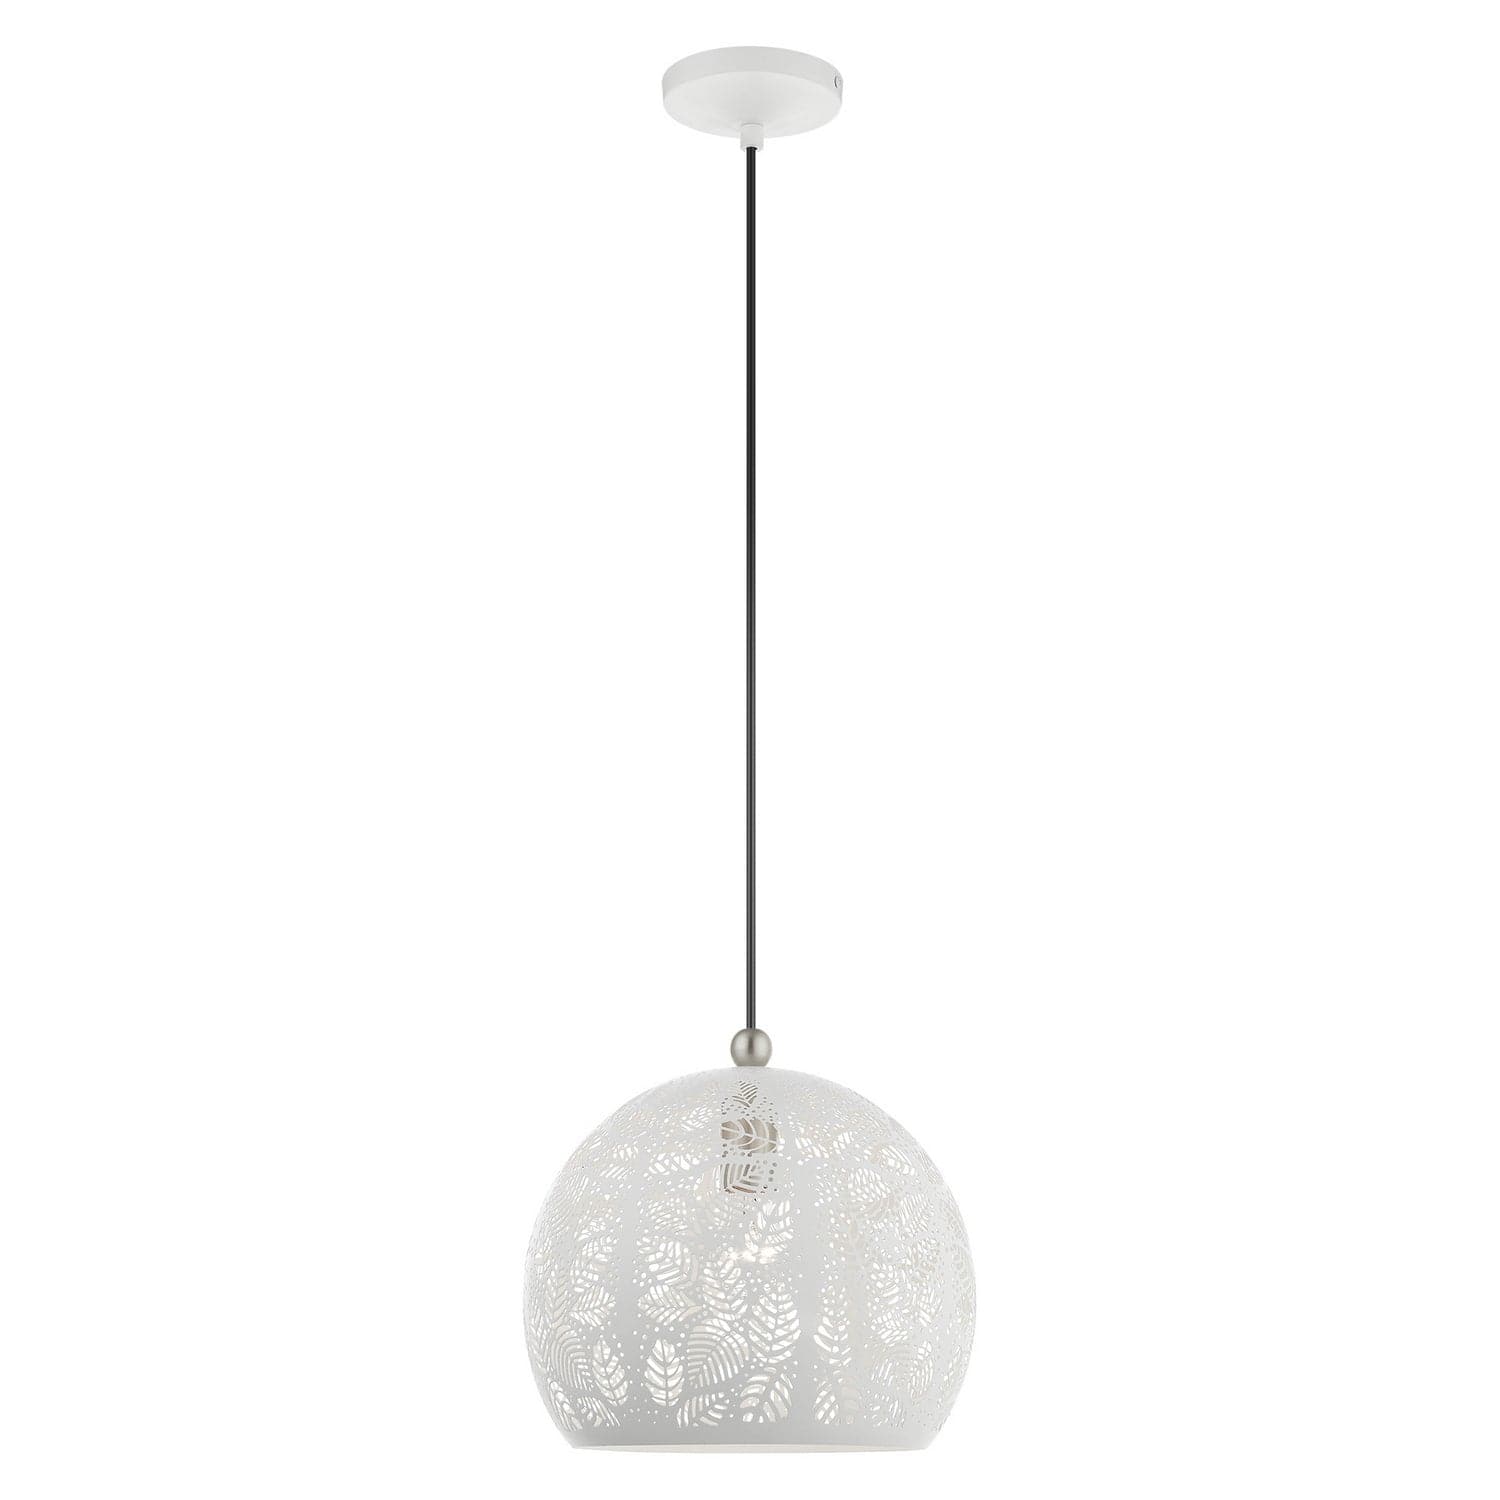 Livex Lighting - 49542-03 - One Light Pendant - Chantilly - White w/ Brushed Nickels